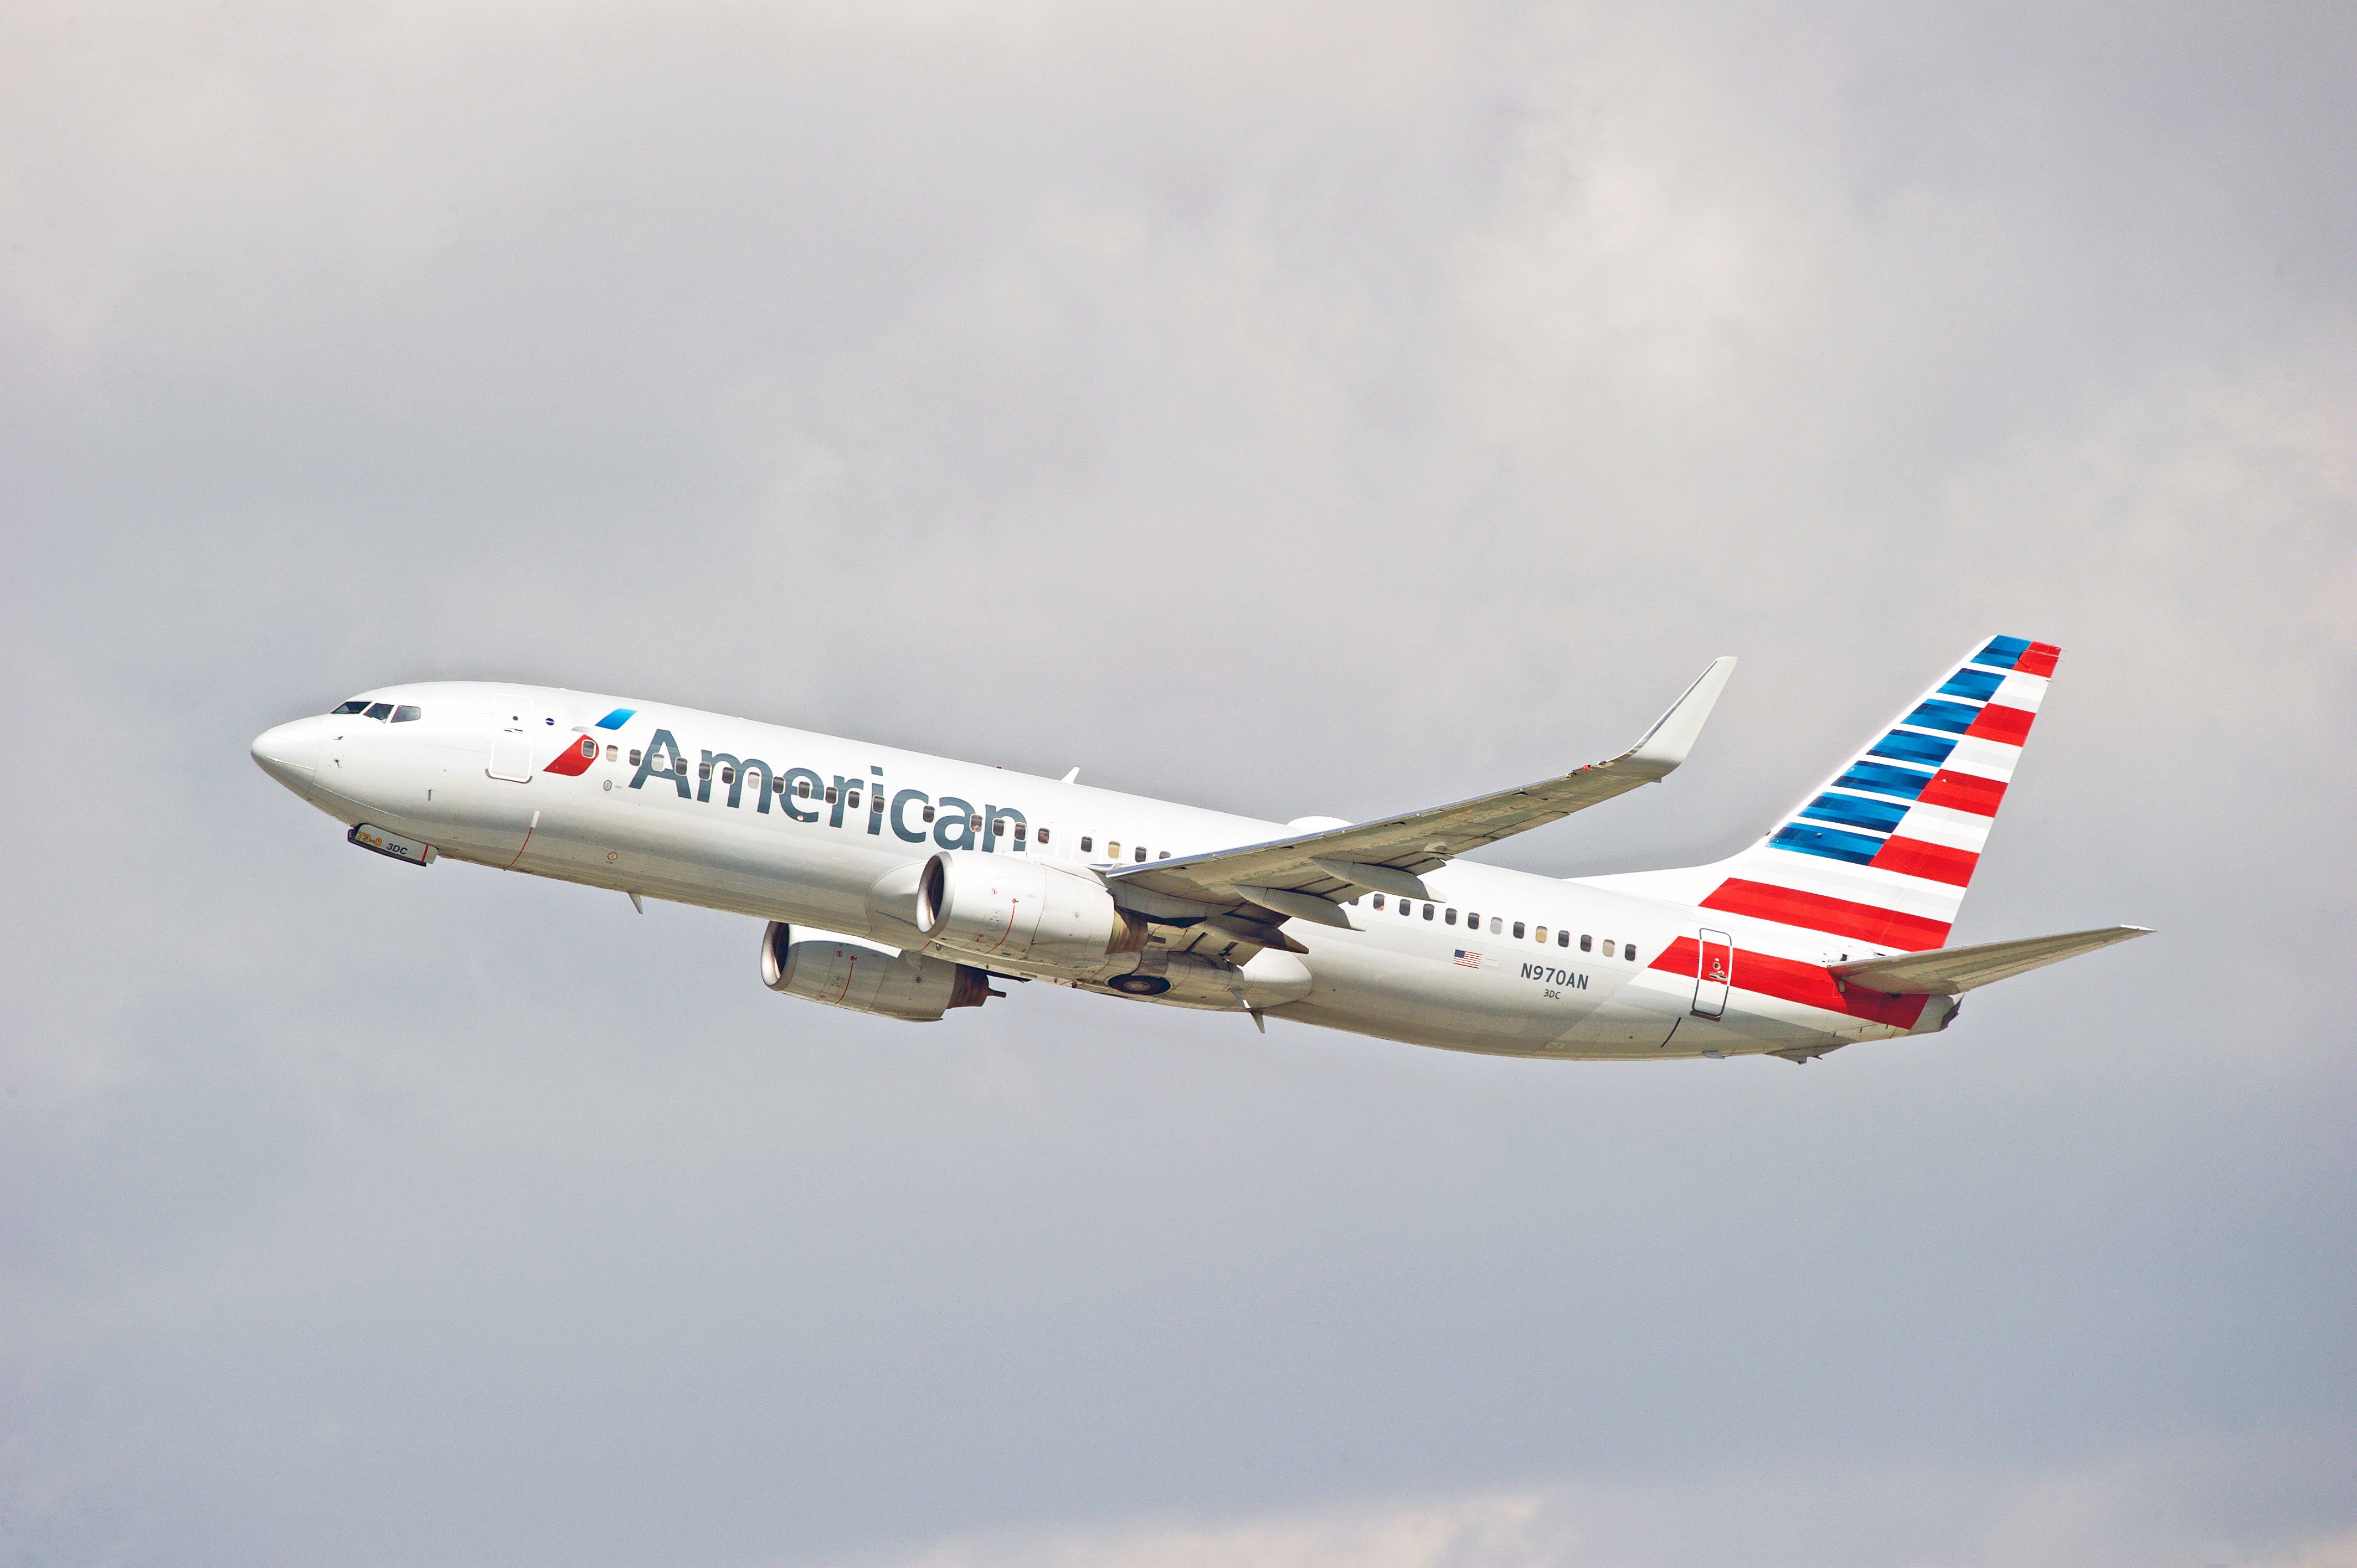 An American Airlines Boeing 737 taking off